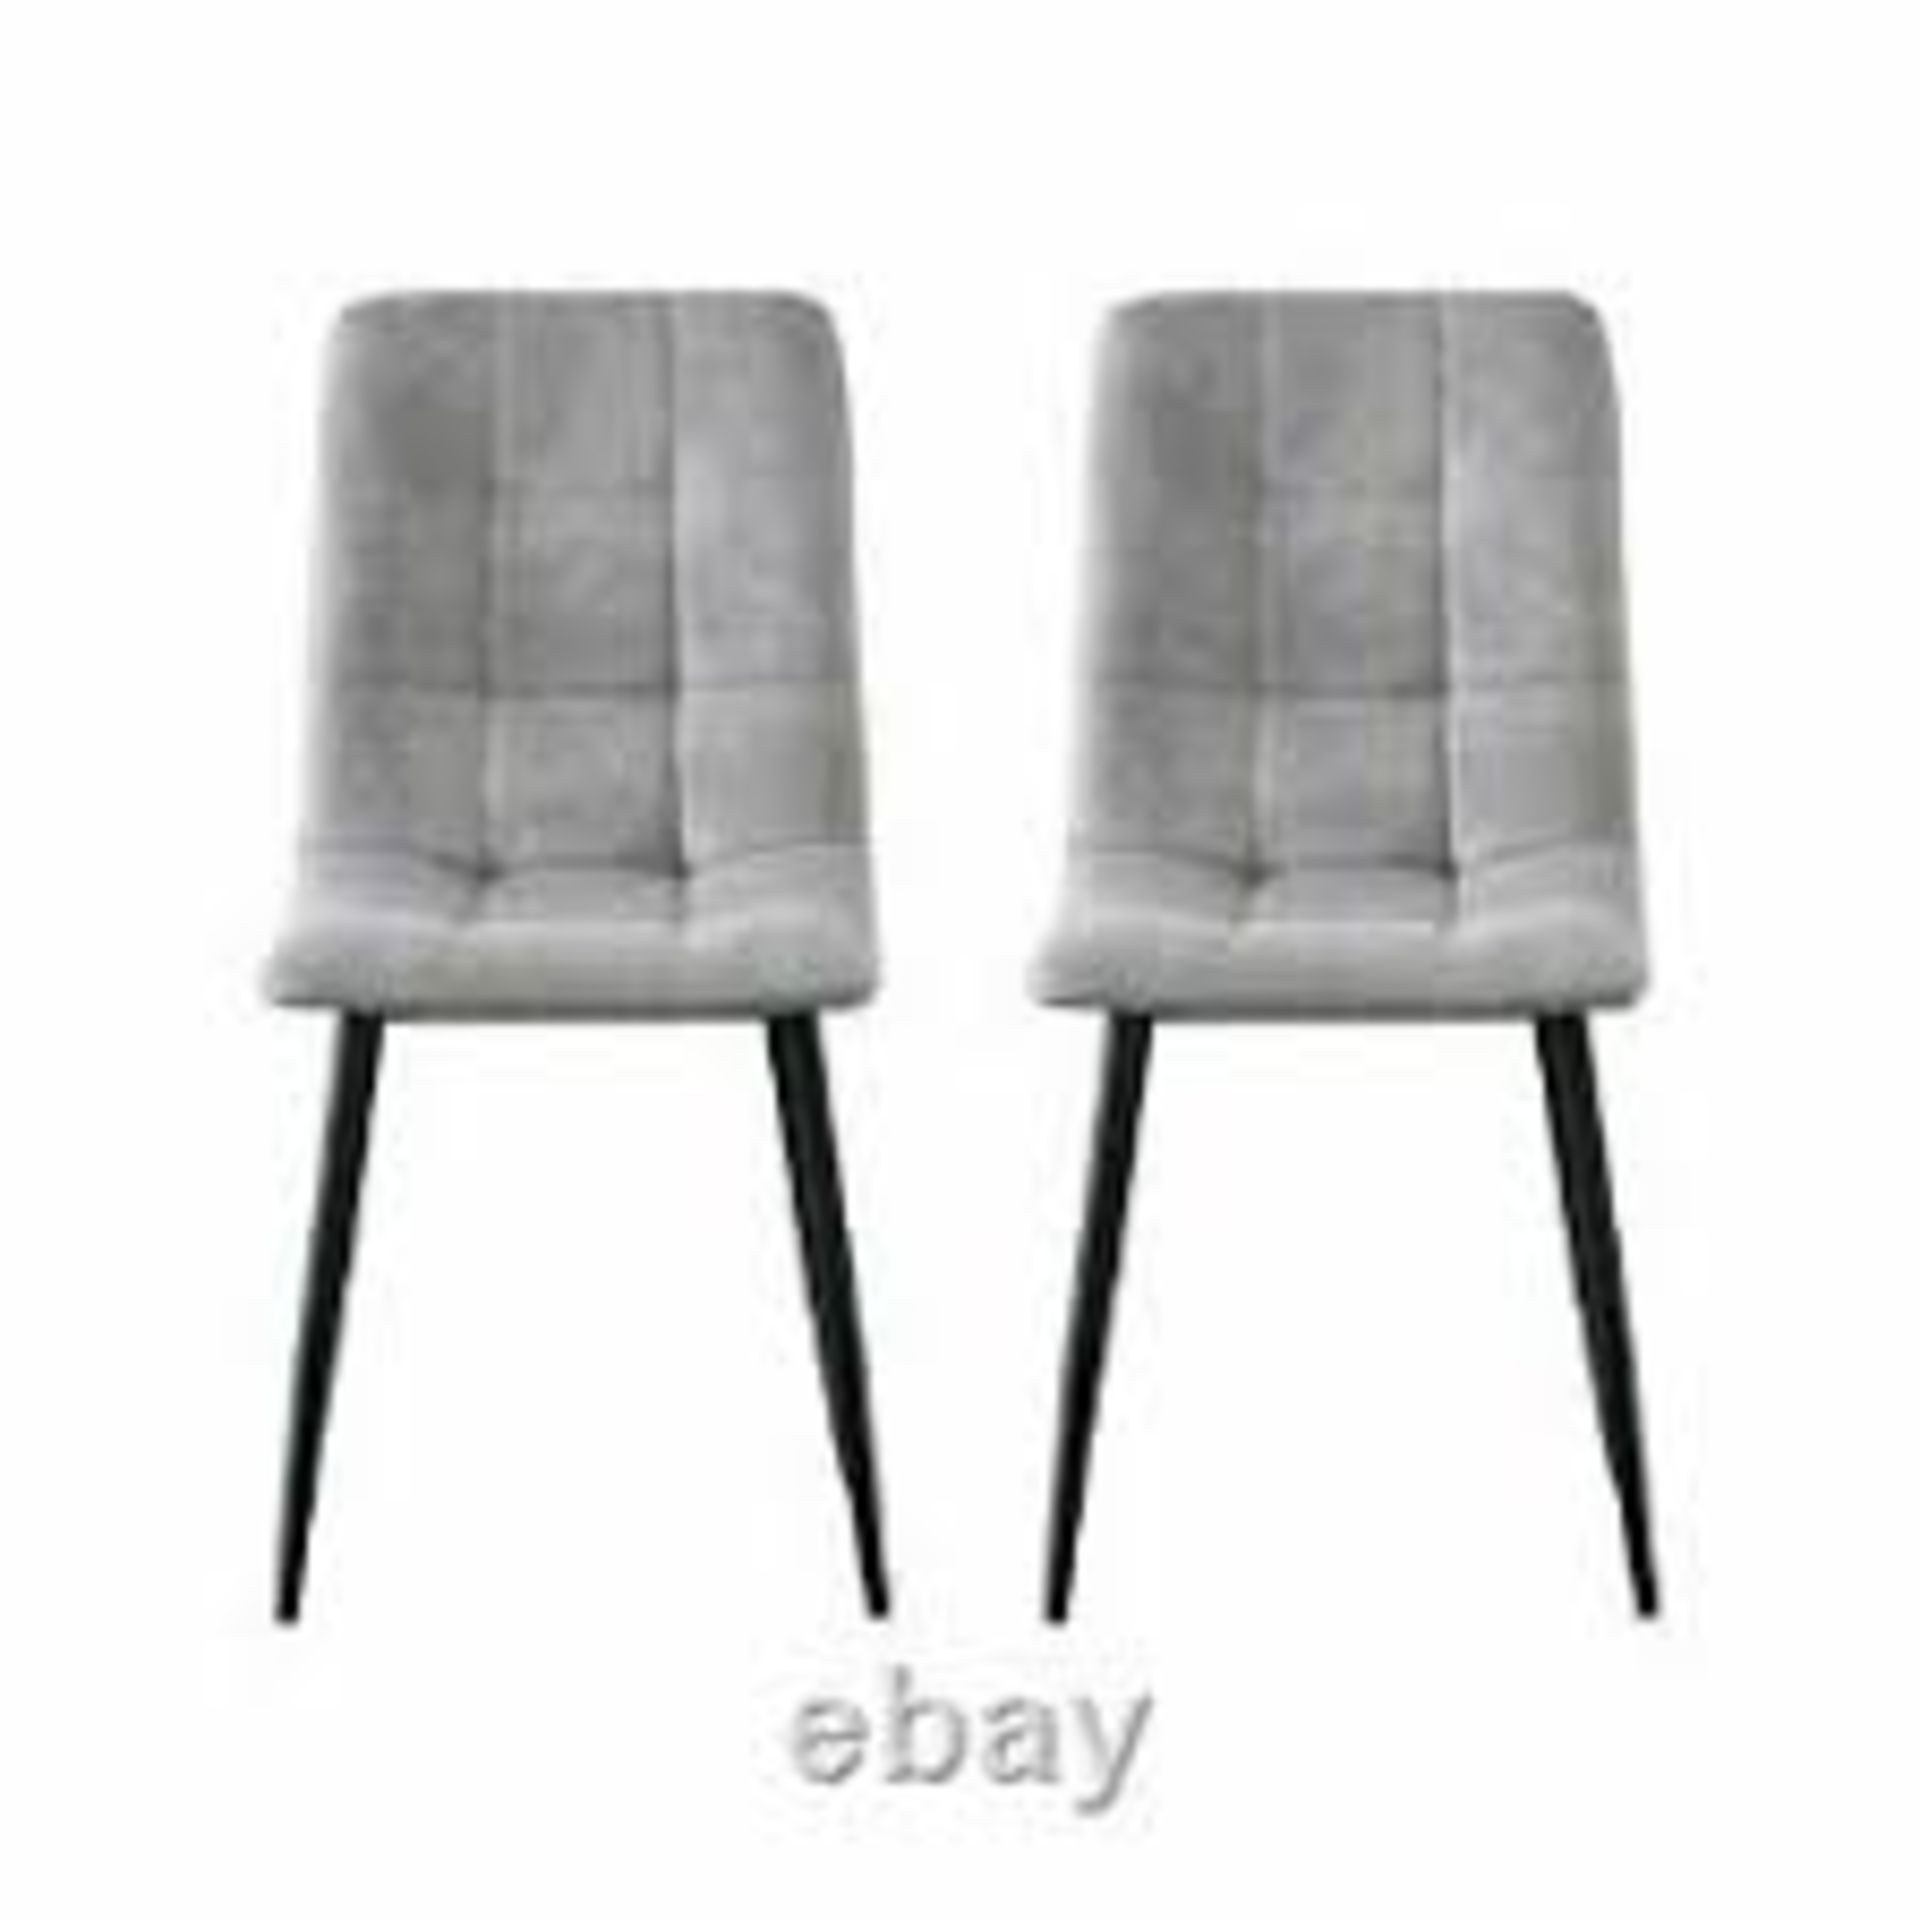 Aliauna Tufted Side Chair (Set of 4). These side chairs add comfortable, sophisticated seating for a